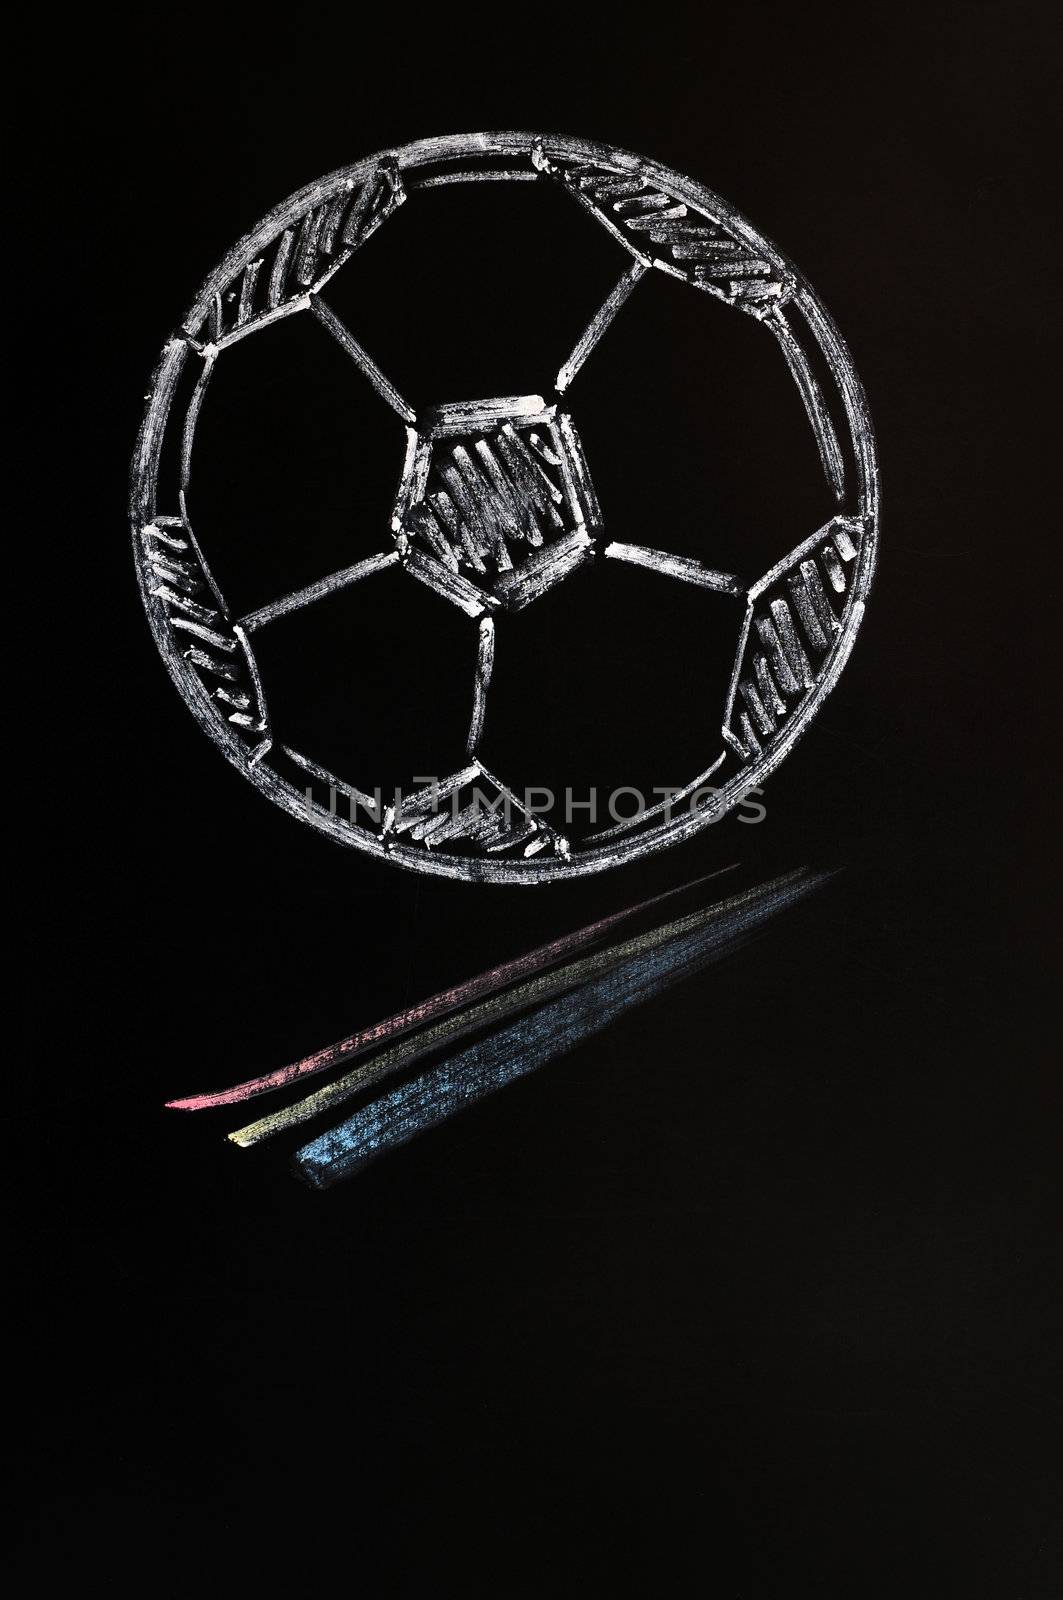 Chalk drawing of Football or soccer on a wooden blackboard